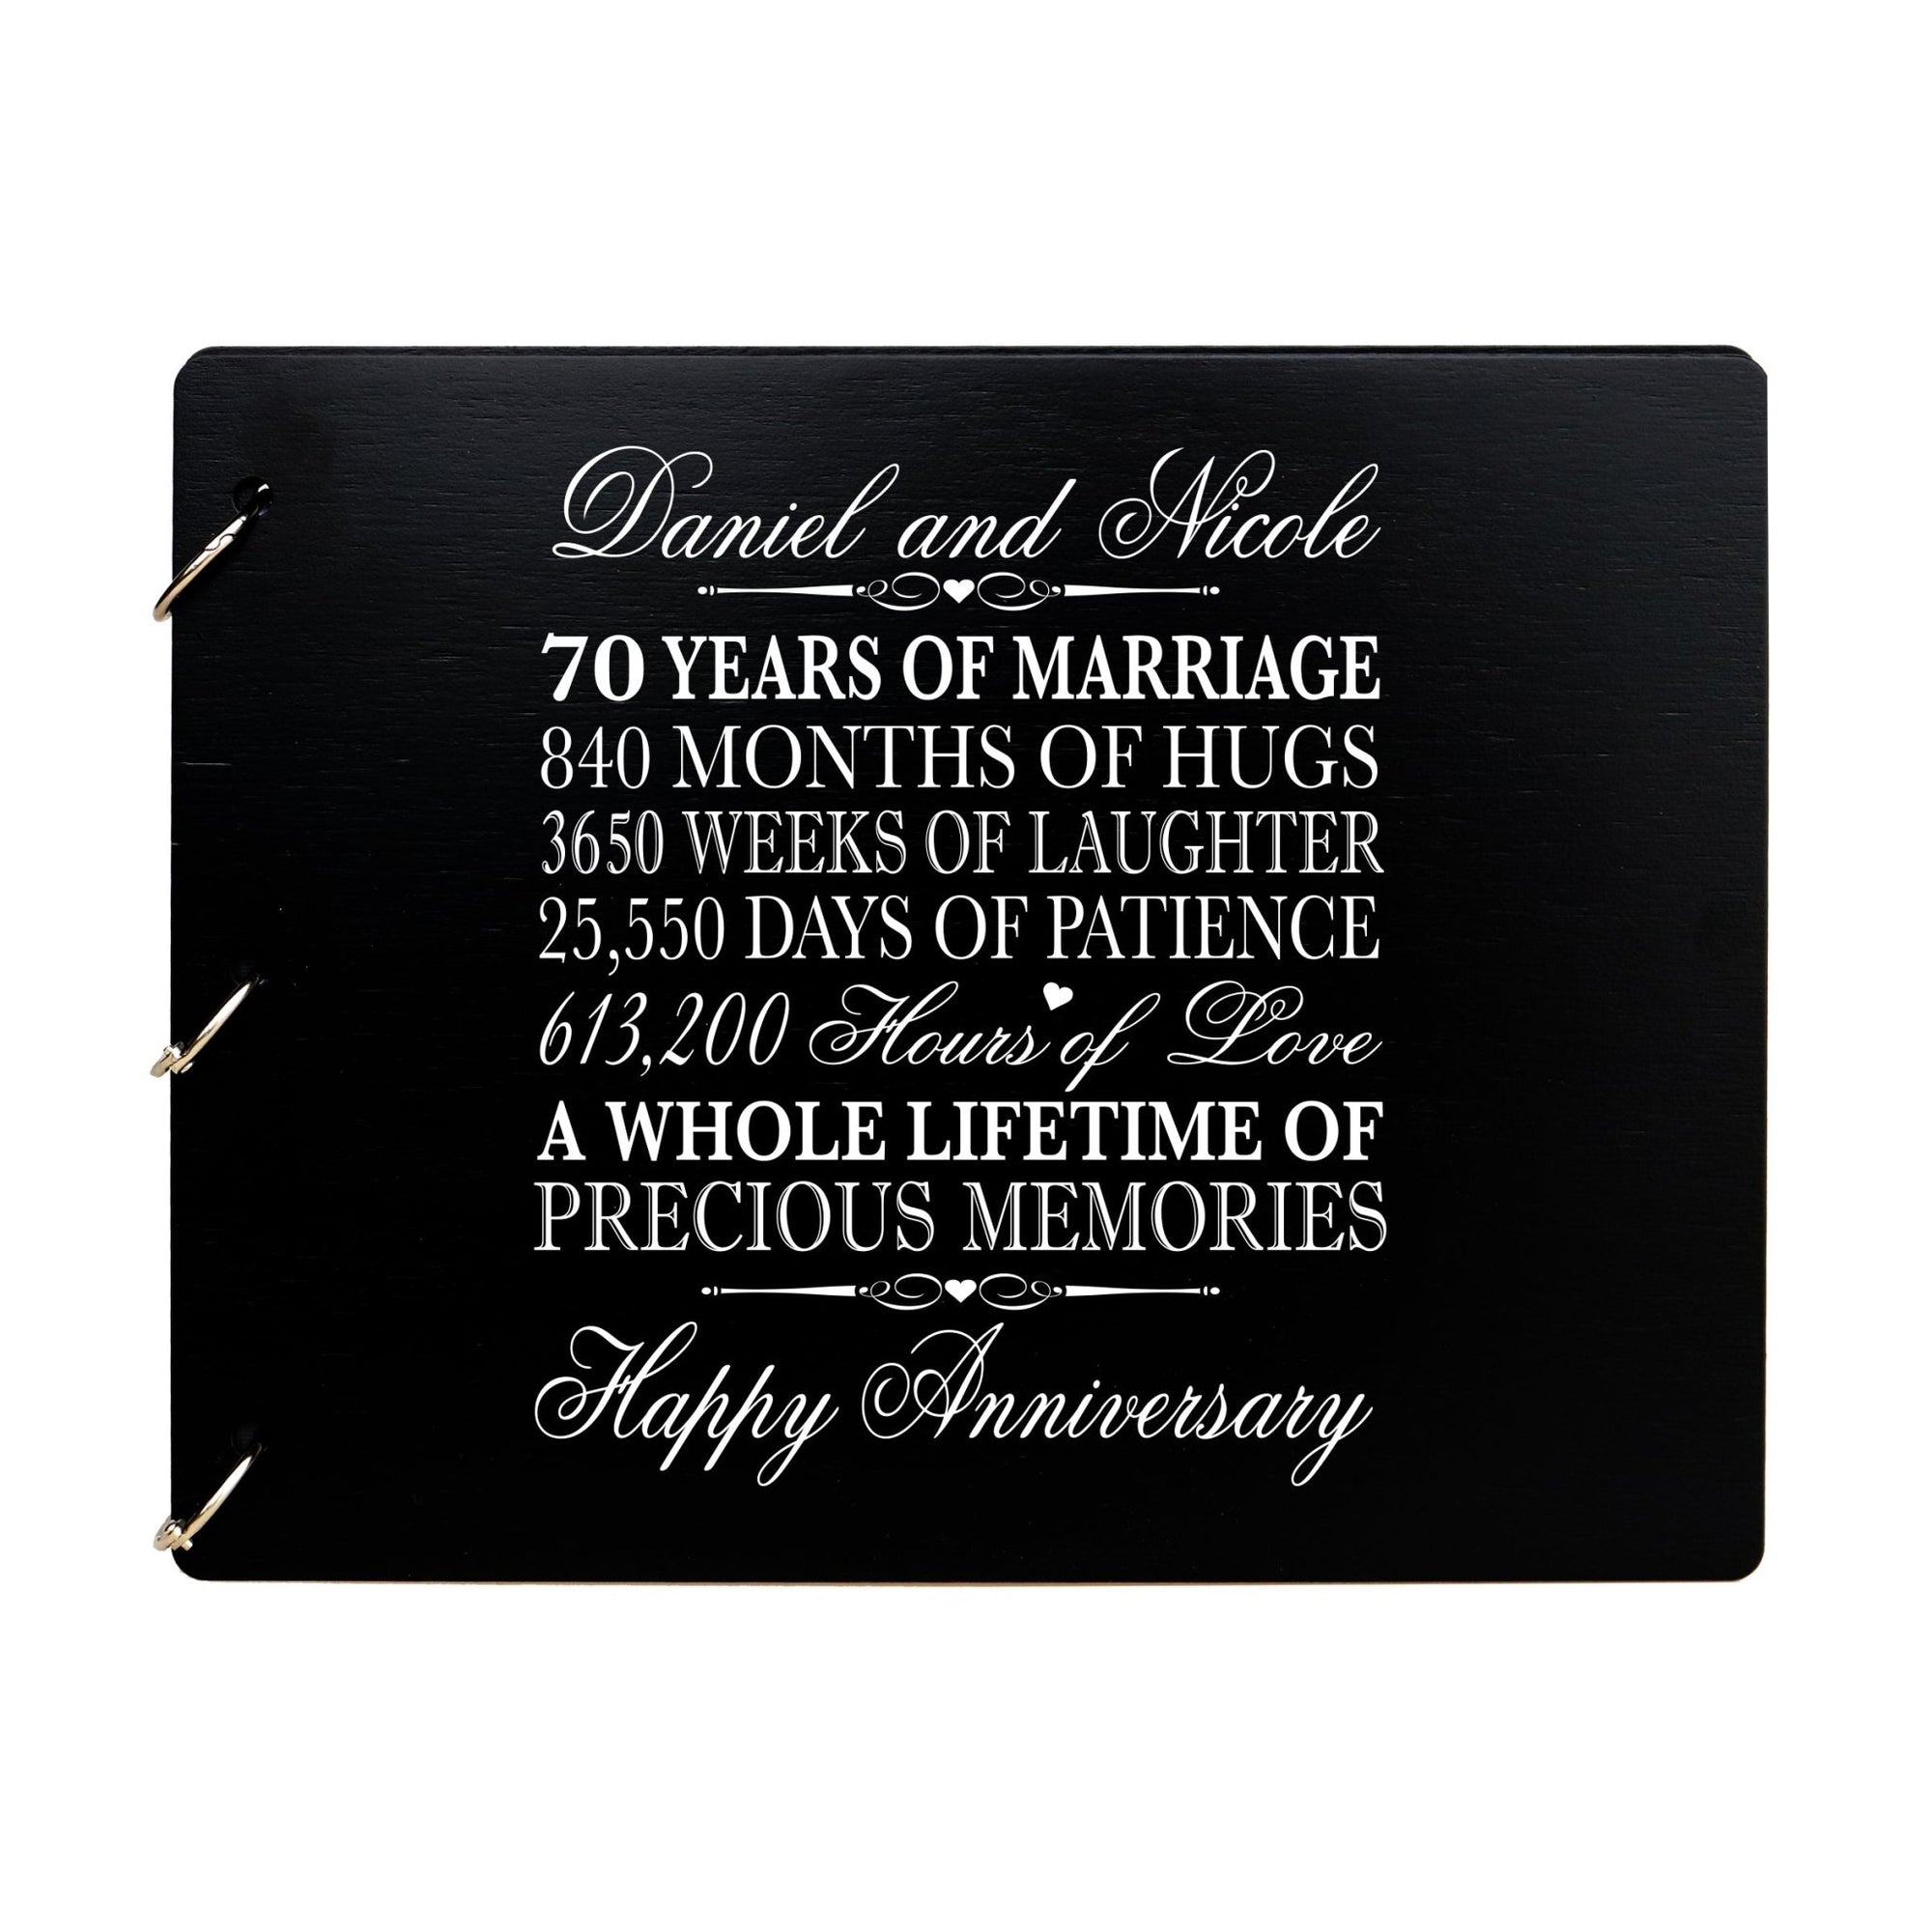 Personalized Guest Book Sign for 70th Wedding Anniversary - Precious Memories - LifeSong Milestones